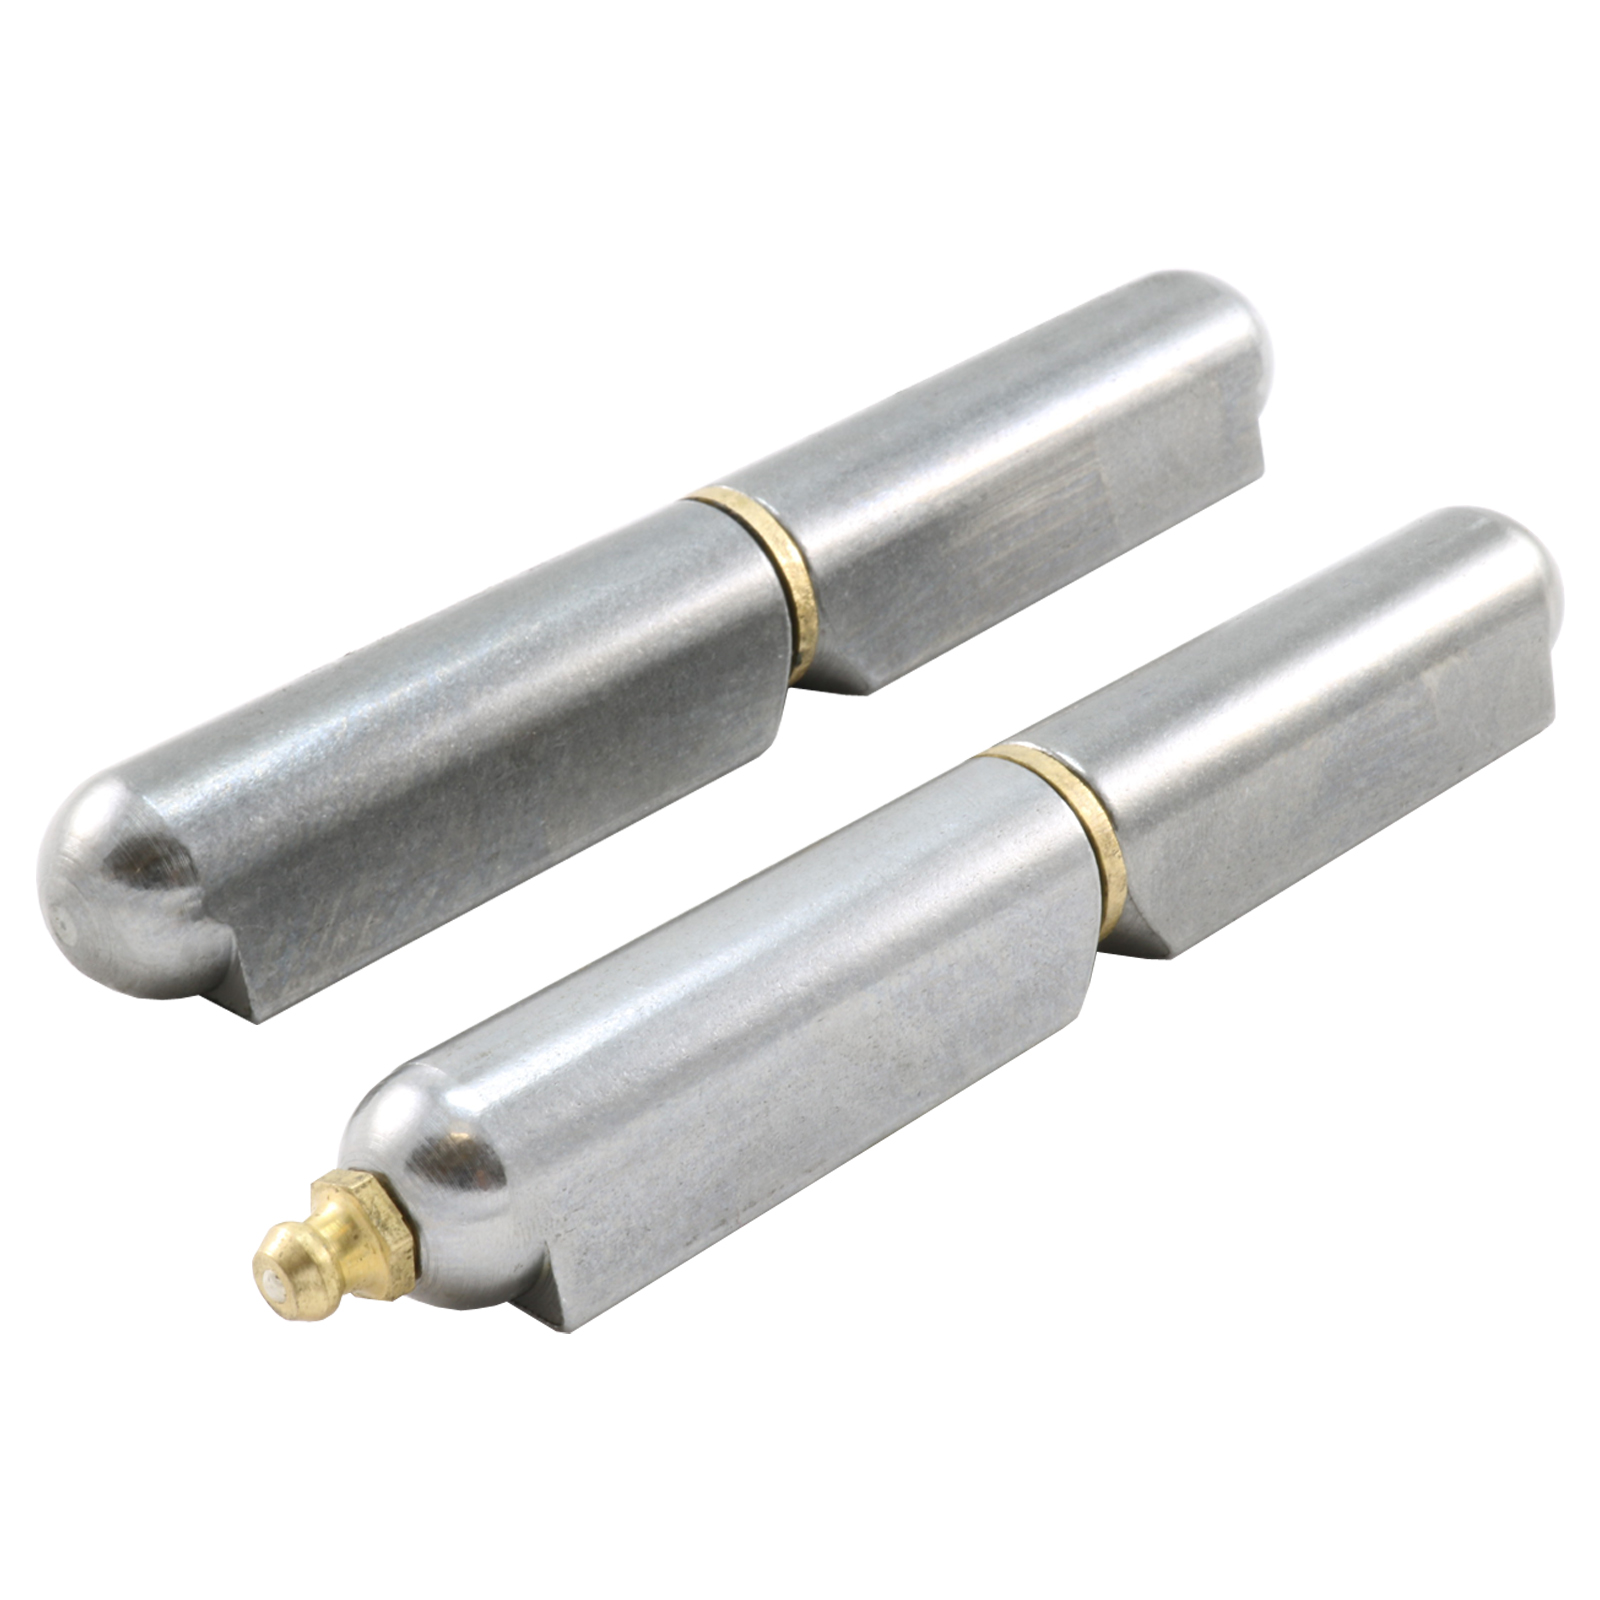 and Brass Without or with Grease Zerk in Multiple Sizes Aluminum Stainless Steel Steel, 10 Heavy Duty Weld-on Bullet Hinge in Weldable Steel 